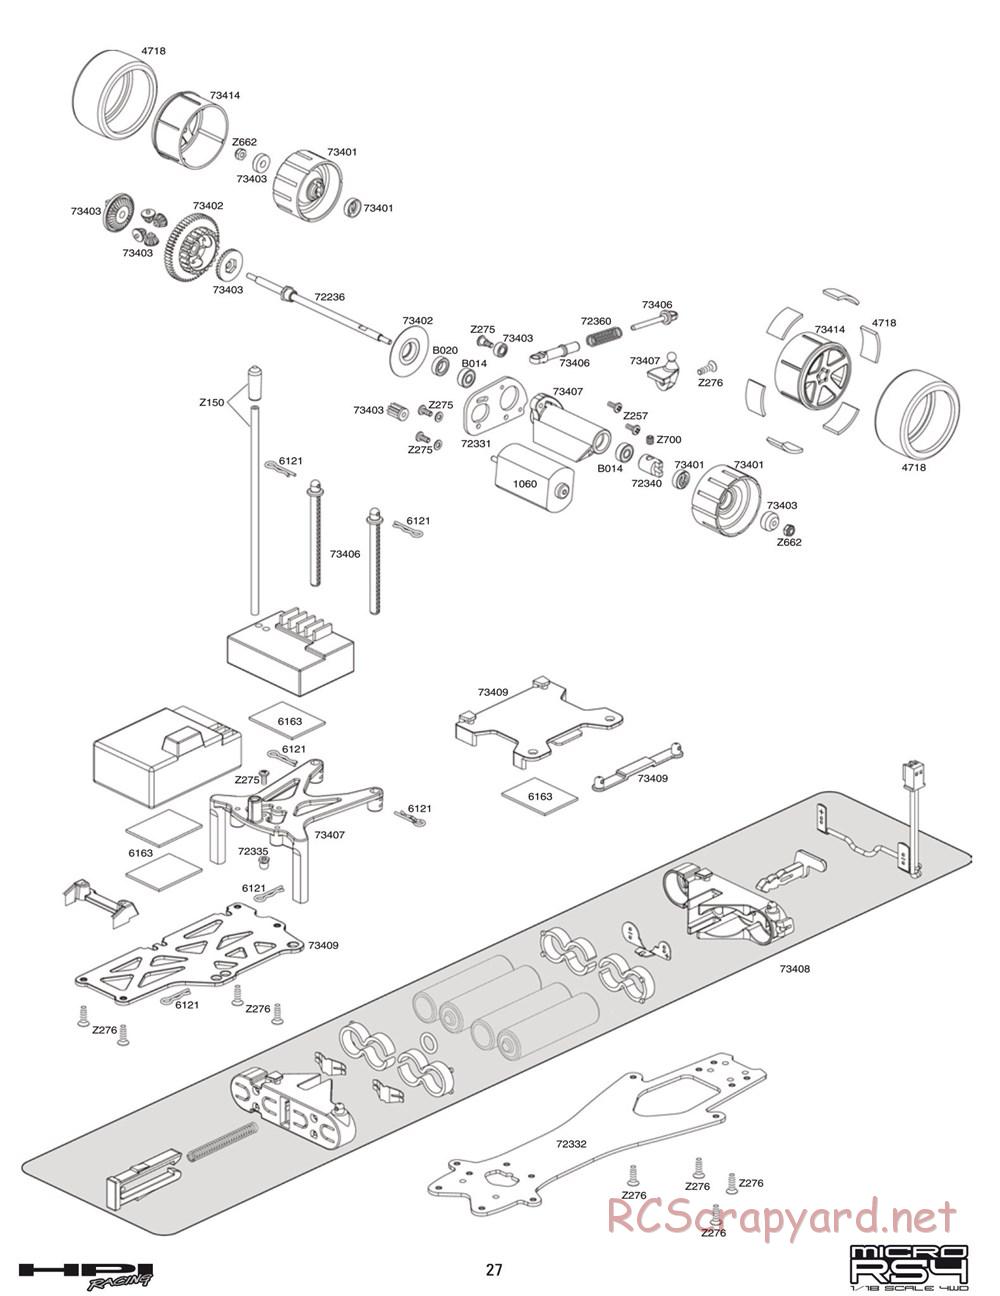 HPI - Micro RS4 - Exploded View - Page 27